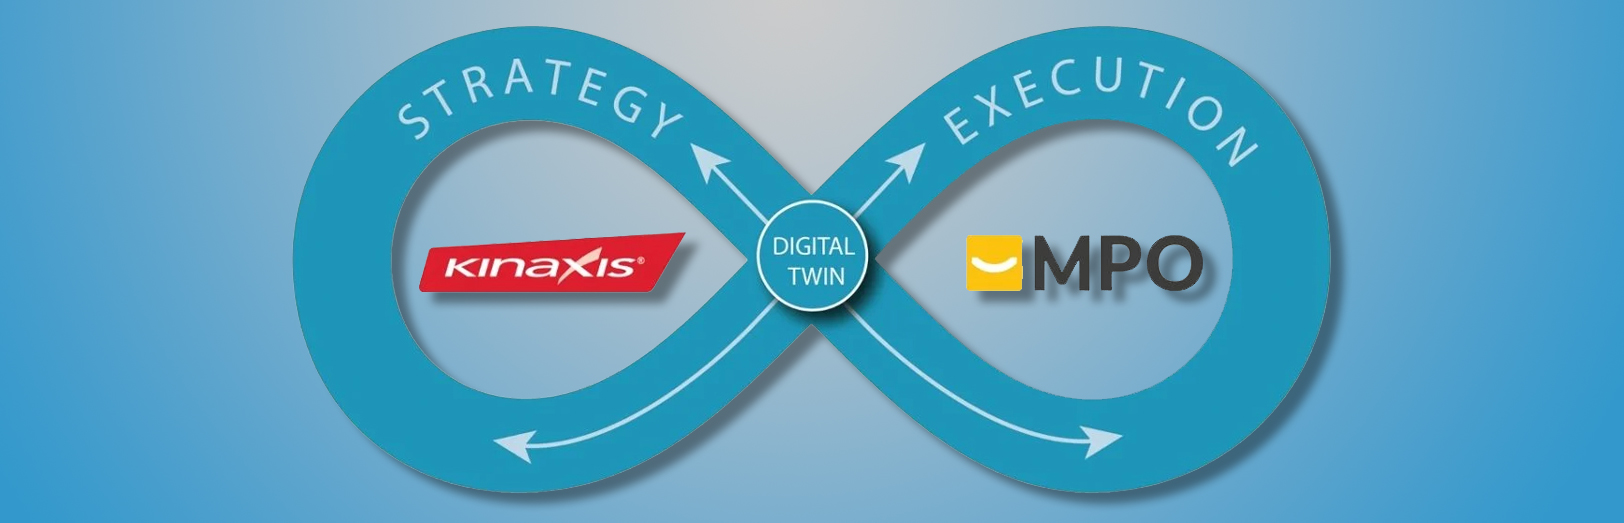 10 Reasons Why Kinaxis and MPO Will Change the Game of Supply Chain Planning & Execution